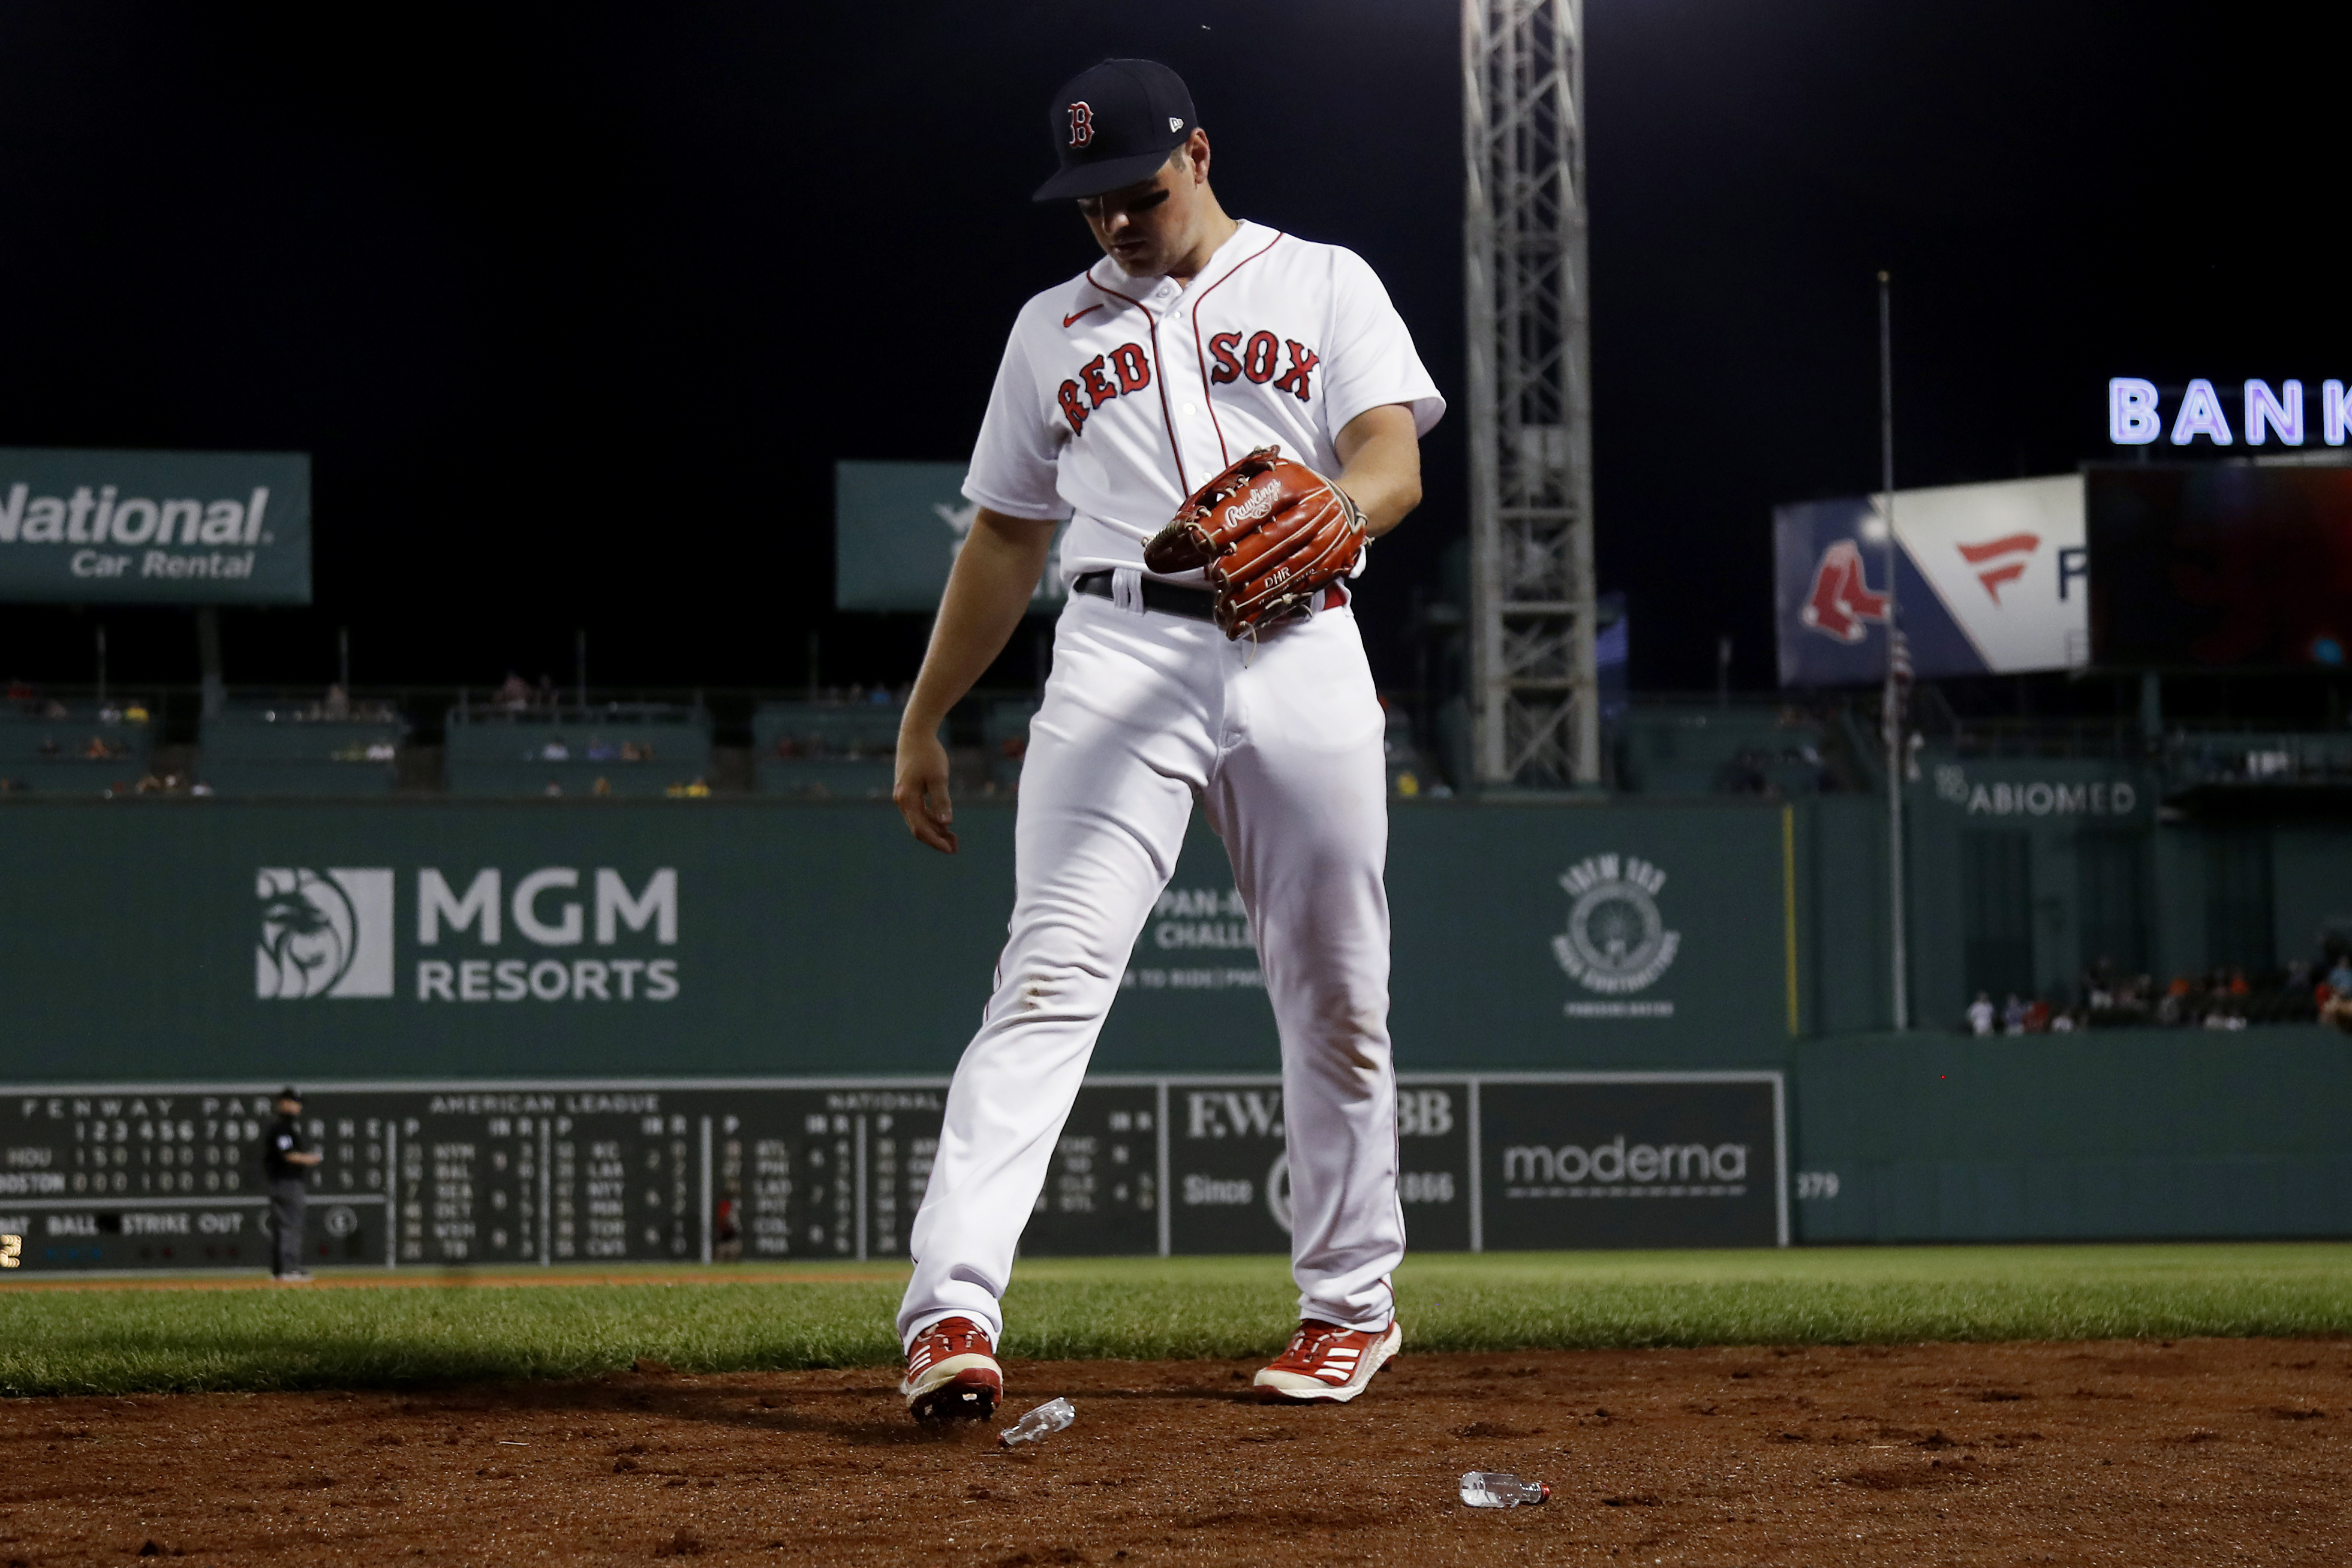 Boston Red Sox's Hunter Renfroe throws out runner with 98 mph